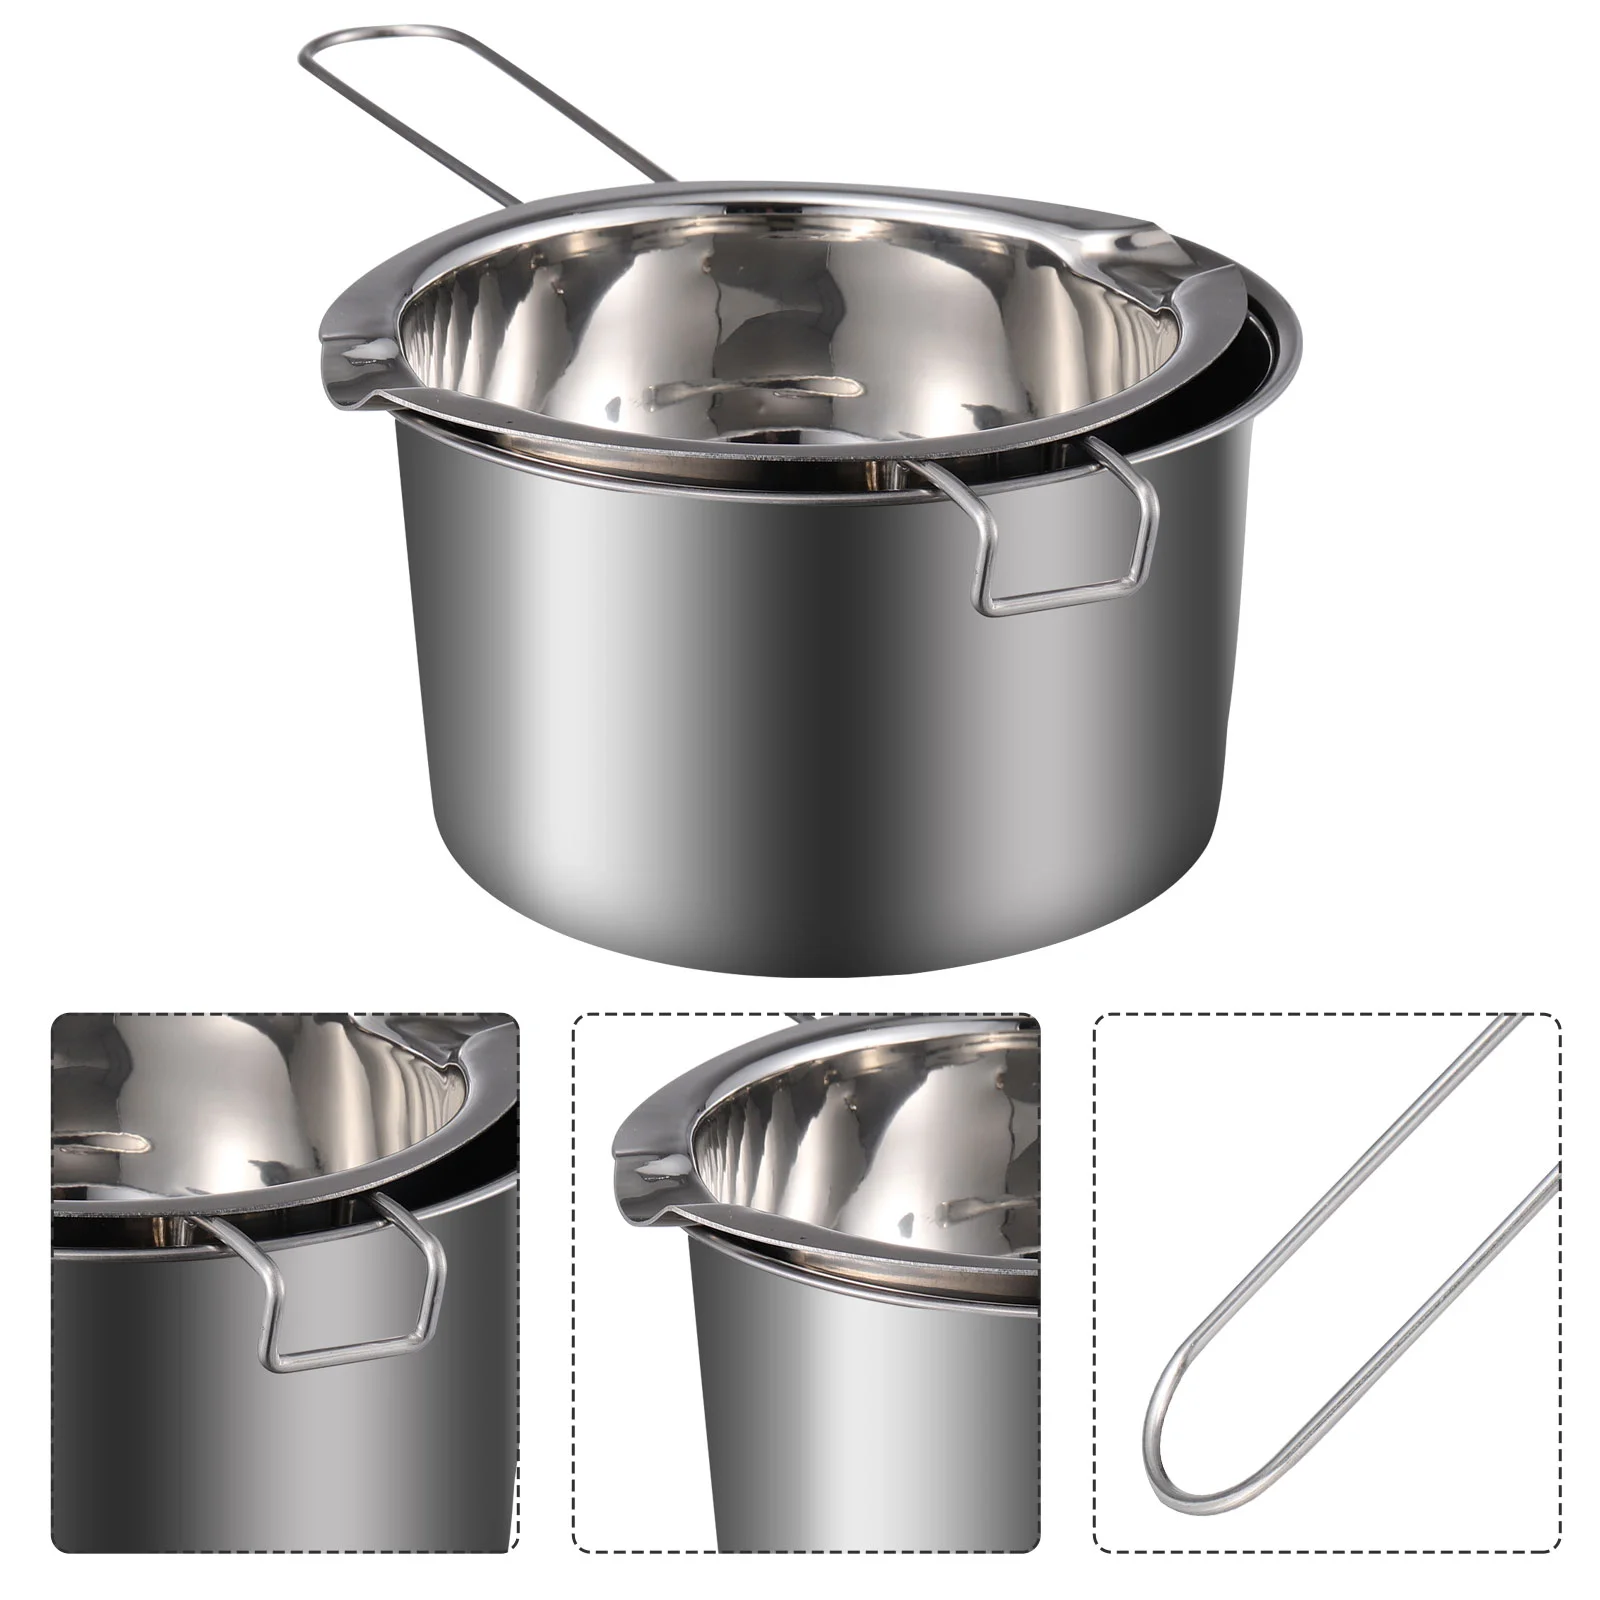 

Pot Melting Boiler Double Chocolatewax Candy Pan Making Stainless Steel Cheesebutter Soap Pouring Warmer Bowl Melt Fondue Water